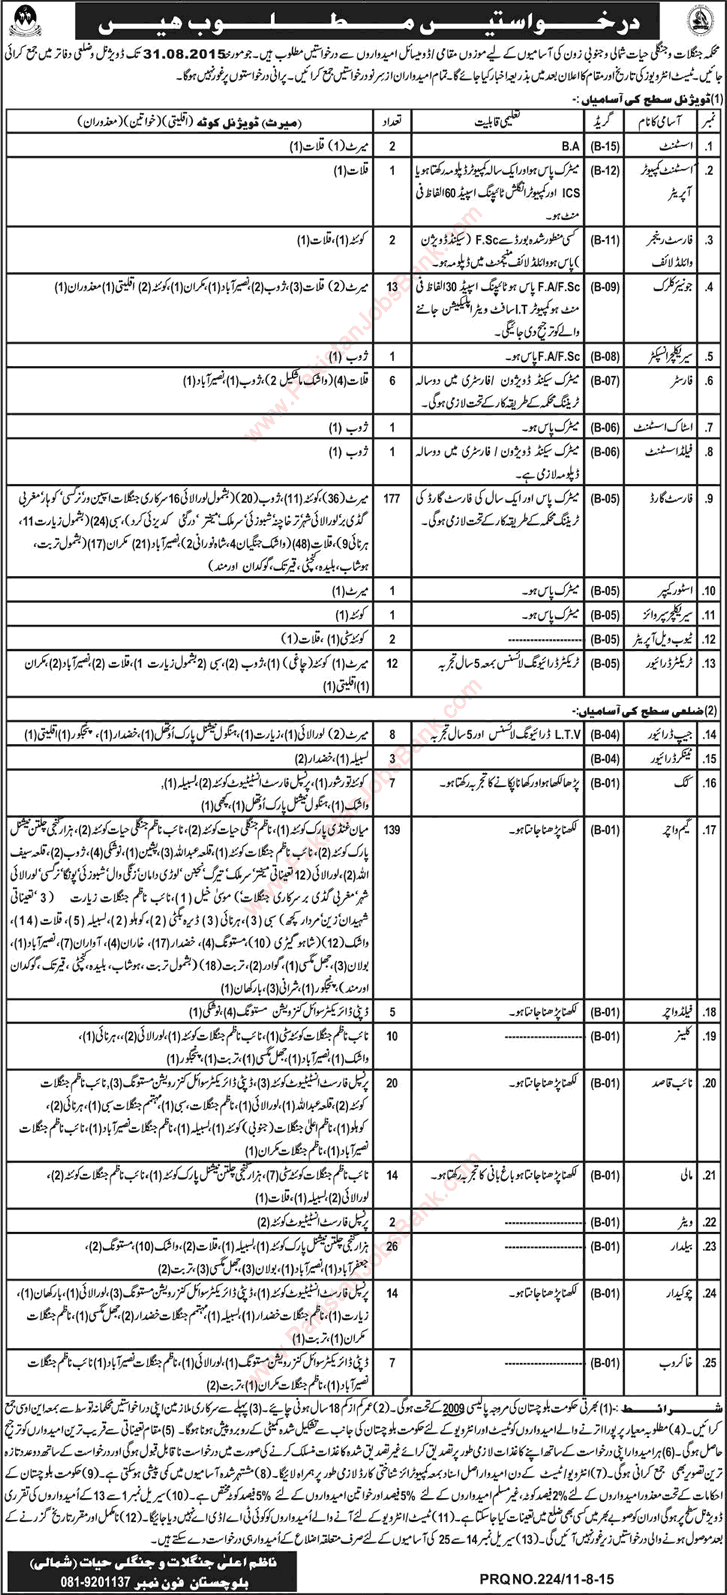 Forest and Wildlife Department Balochistan Jobs 2015 August Clerks, Forest Guards, Game Watchers & Others